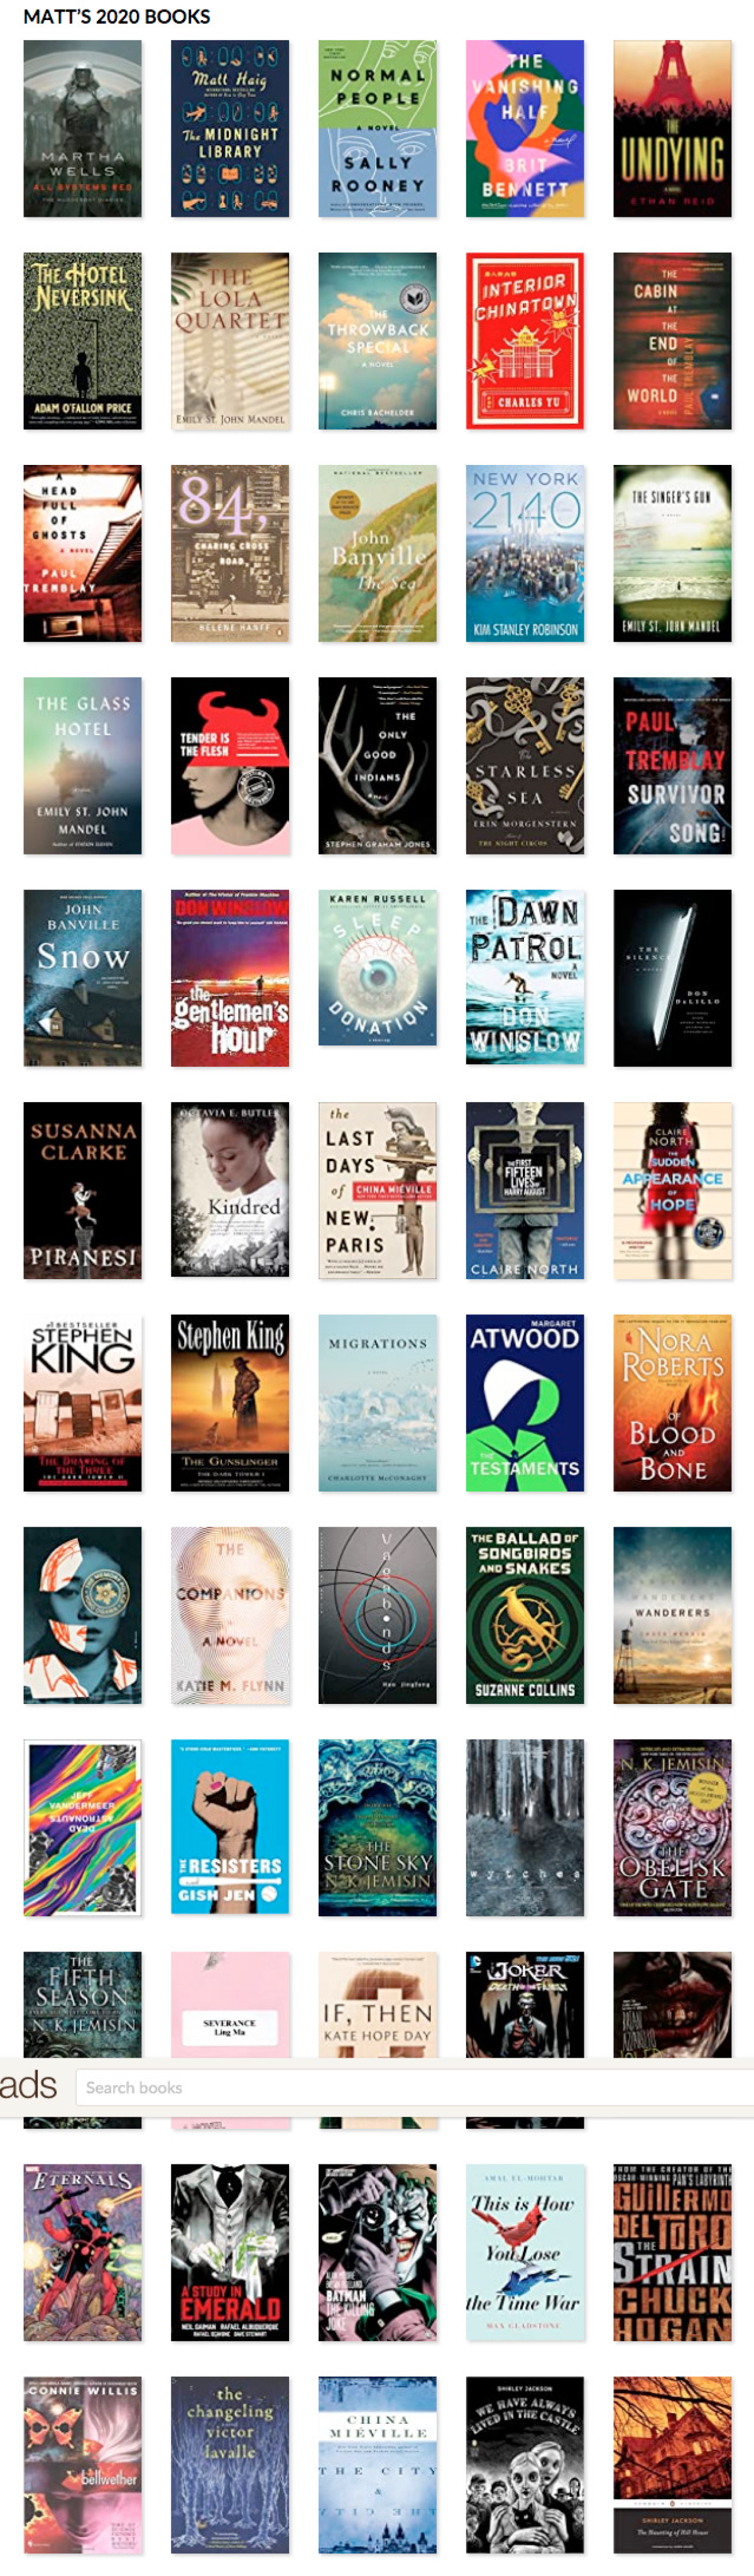 Here are the 60 books I read in reverse chronological order